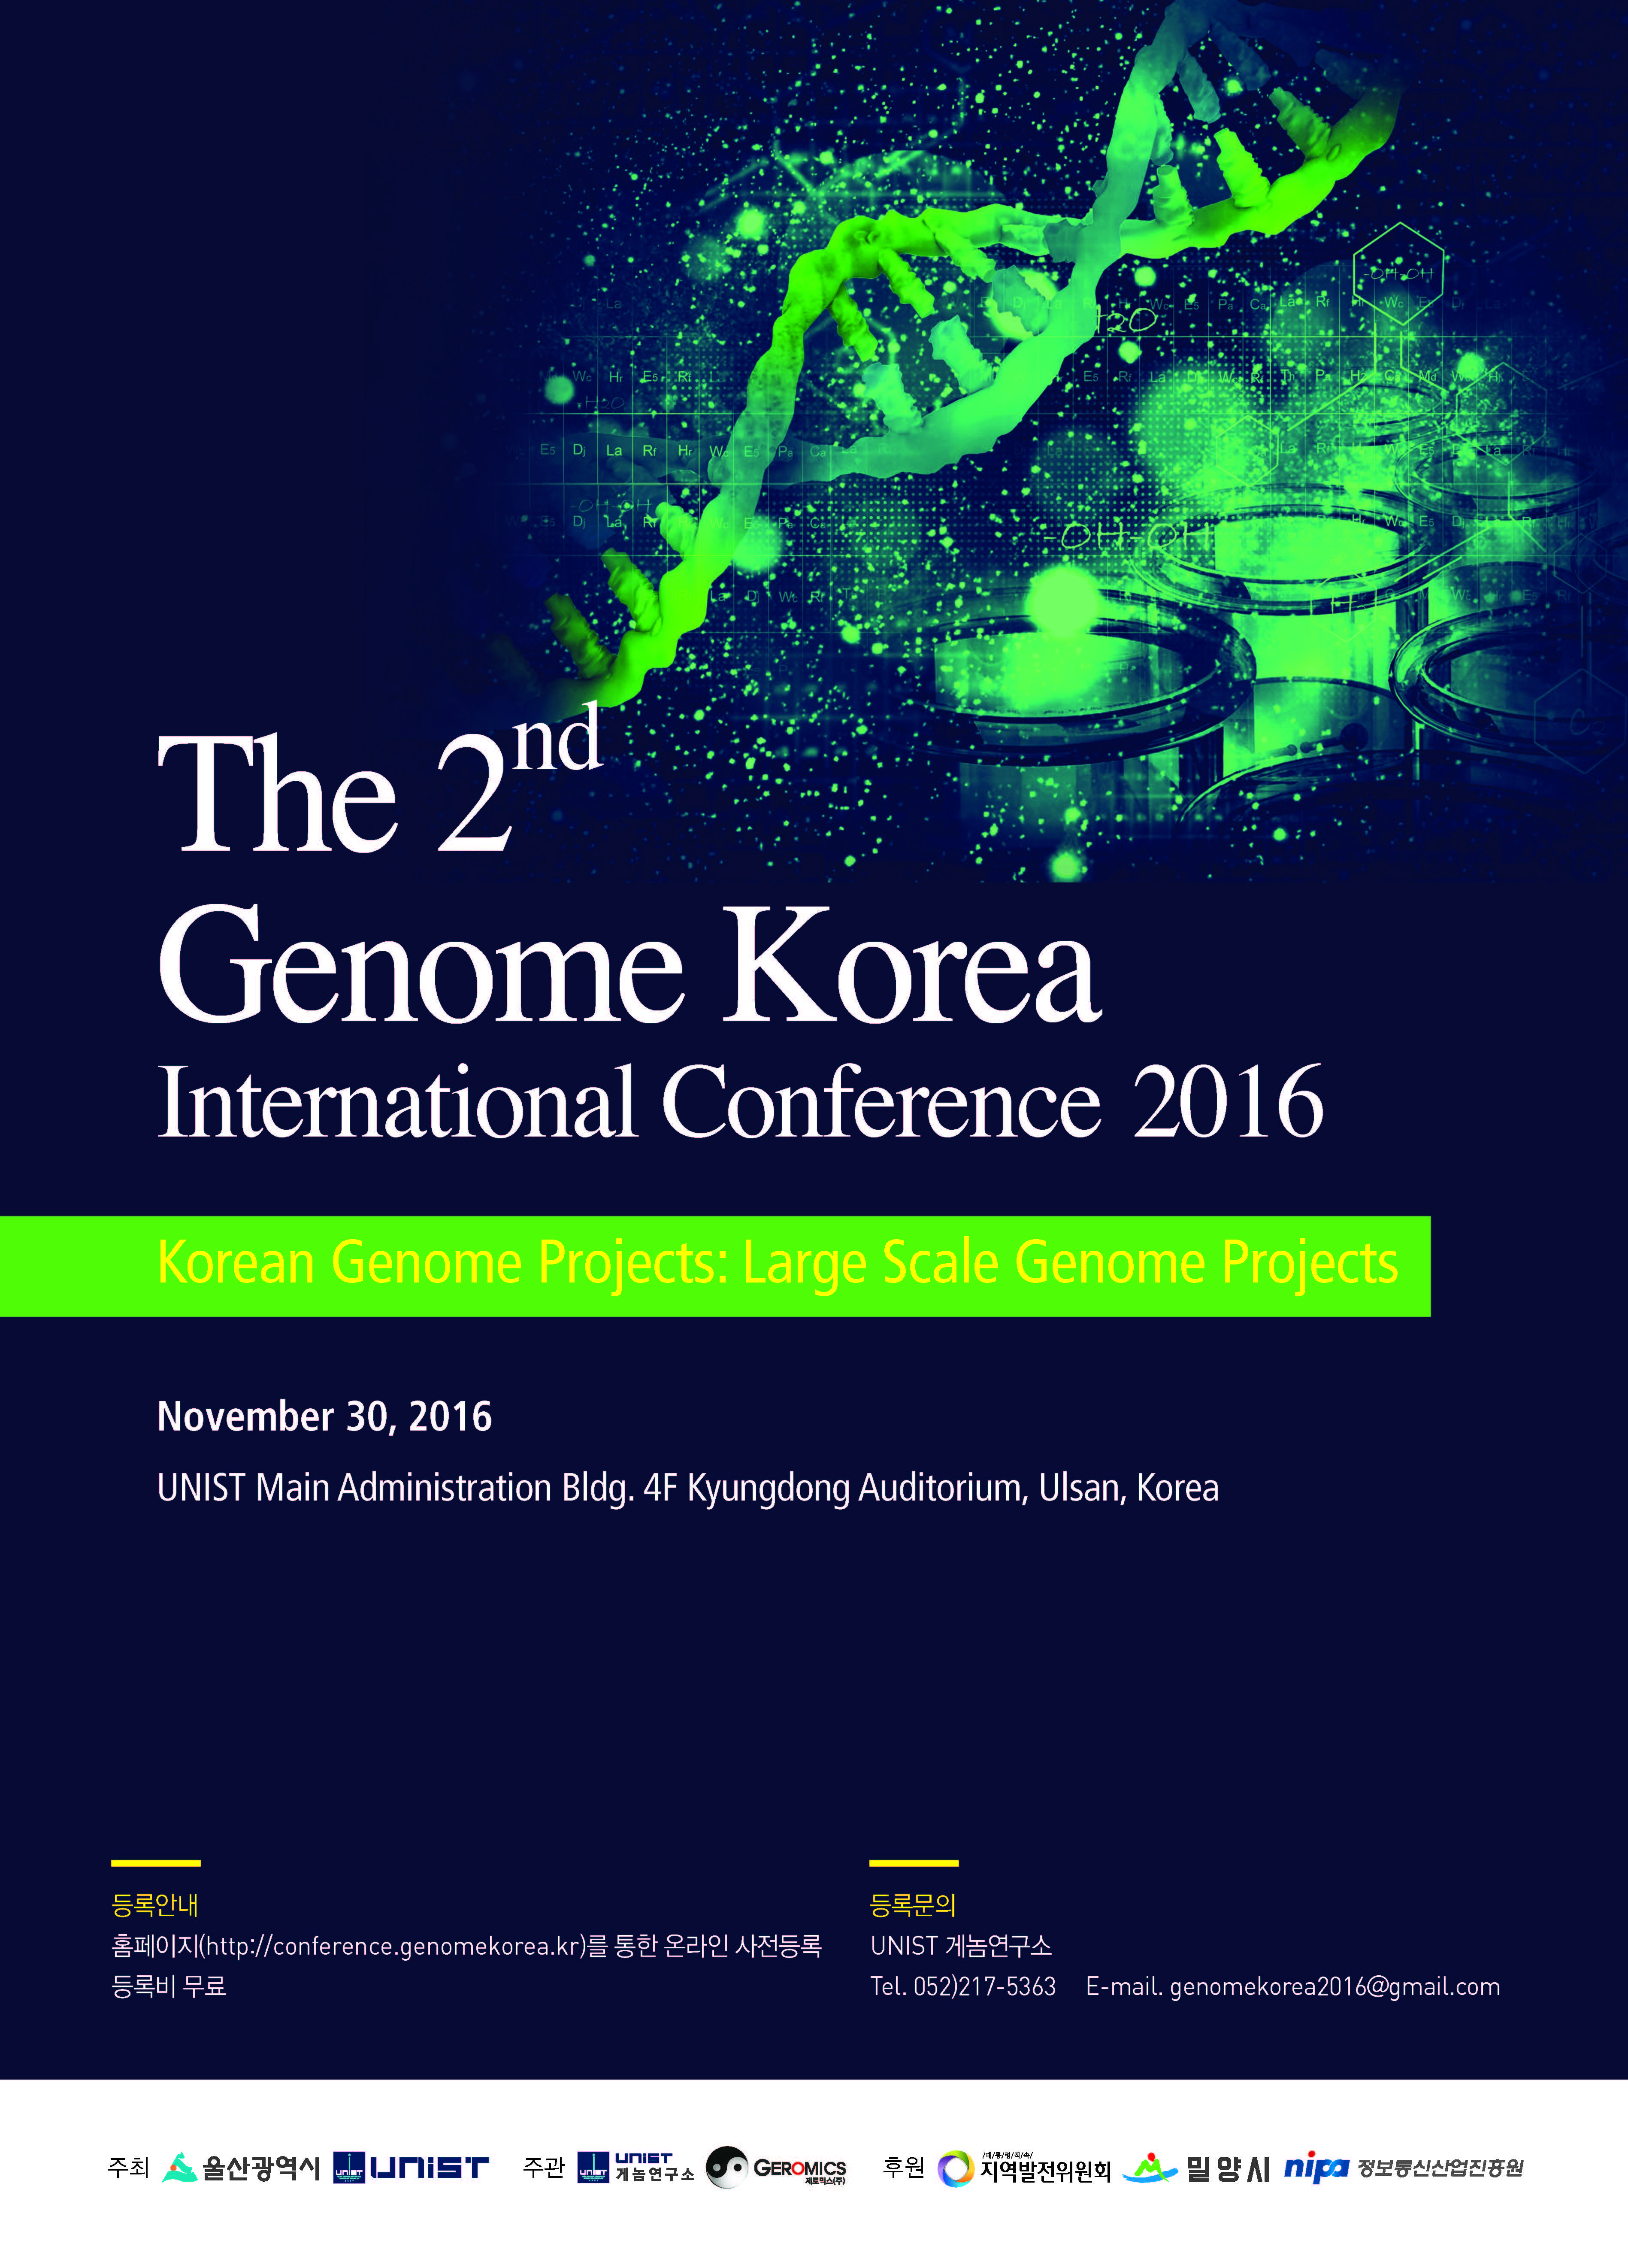 The 2nd Genome Korea International Conference 2016